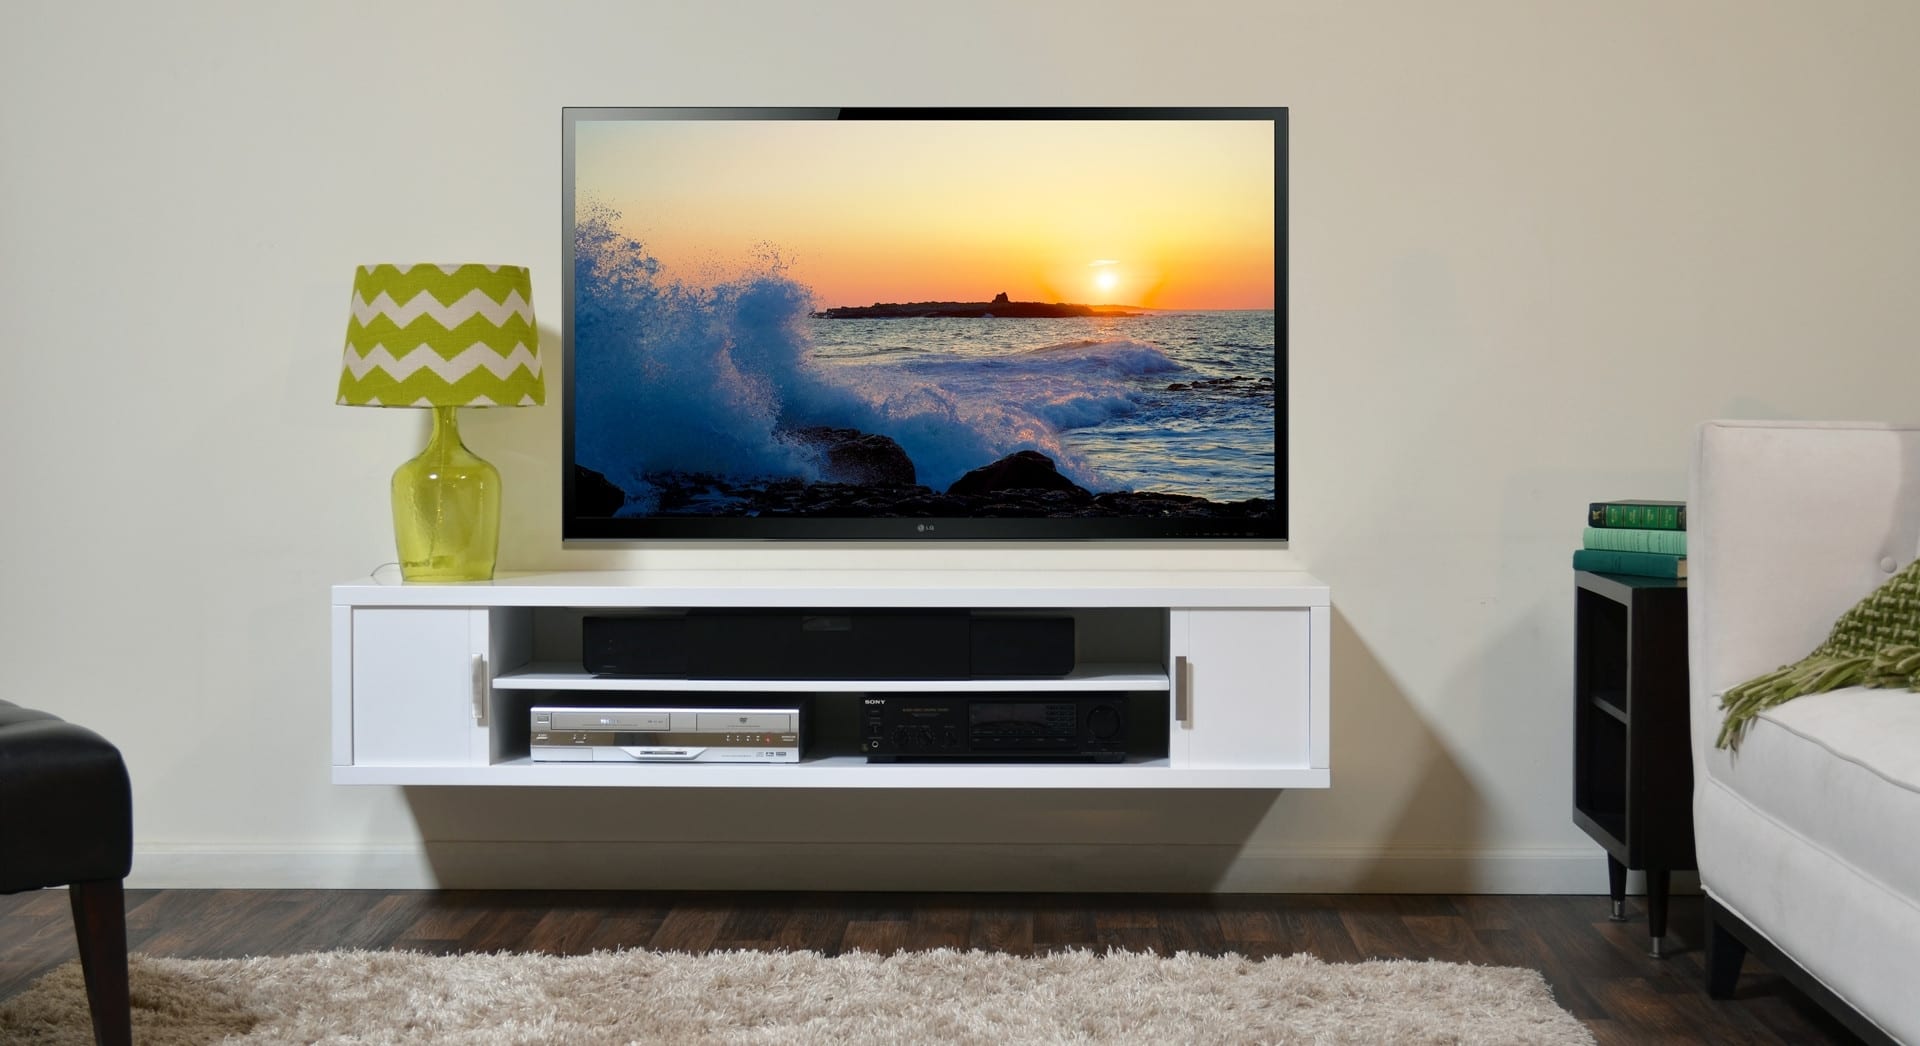 Choosing A TV For Your Living Room 